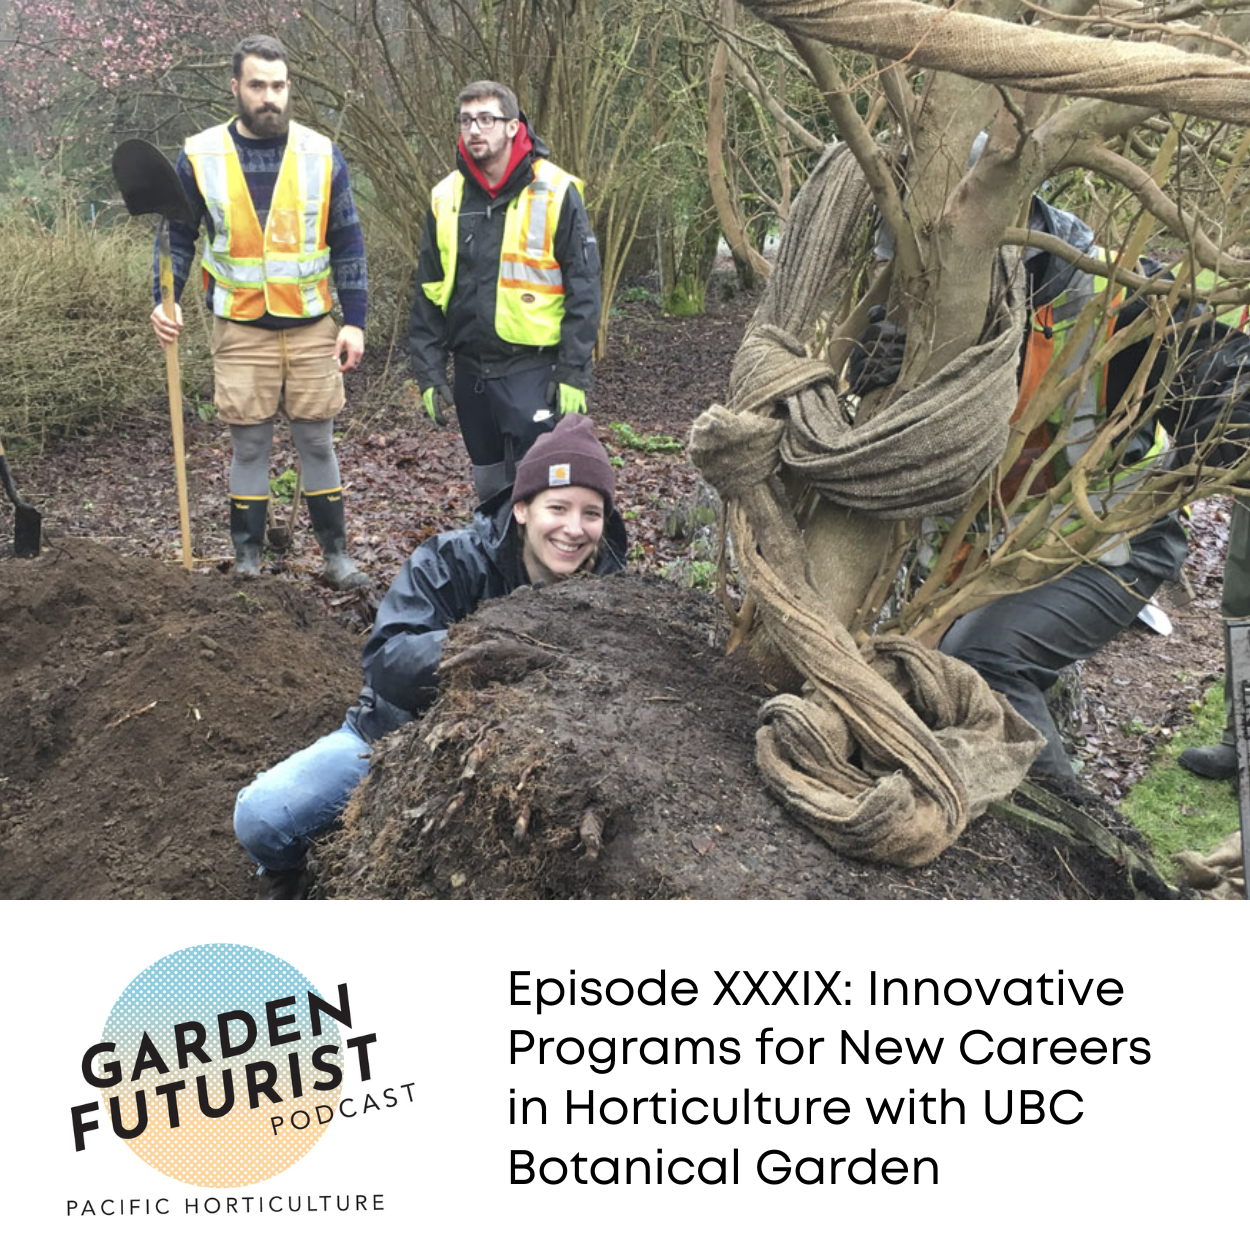 Episode XXXIX: Innovative Programs for New Careers in Horticulture with UBC Botanical Garden